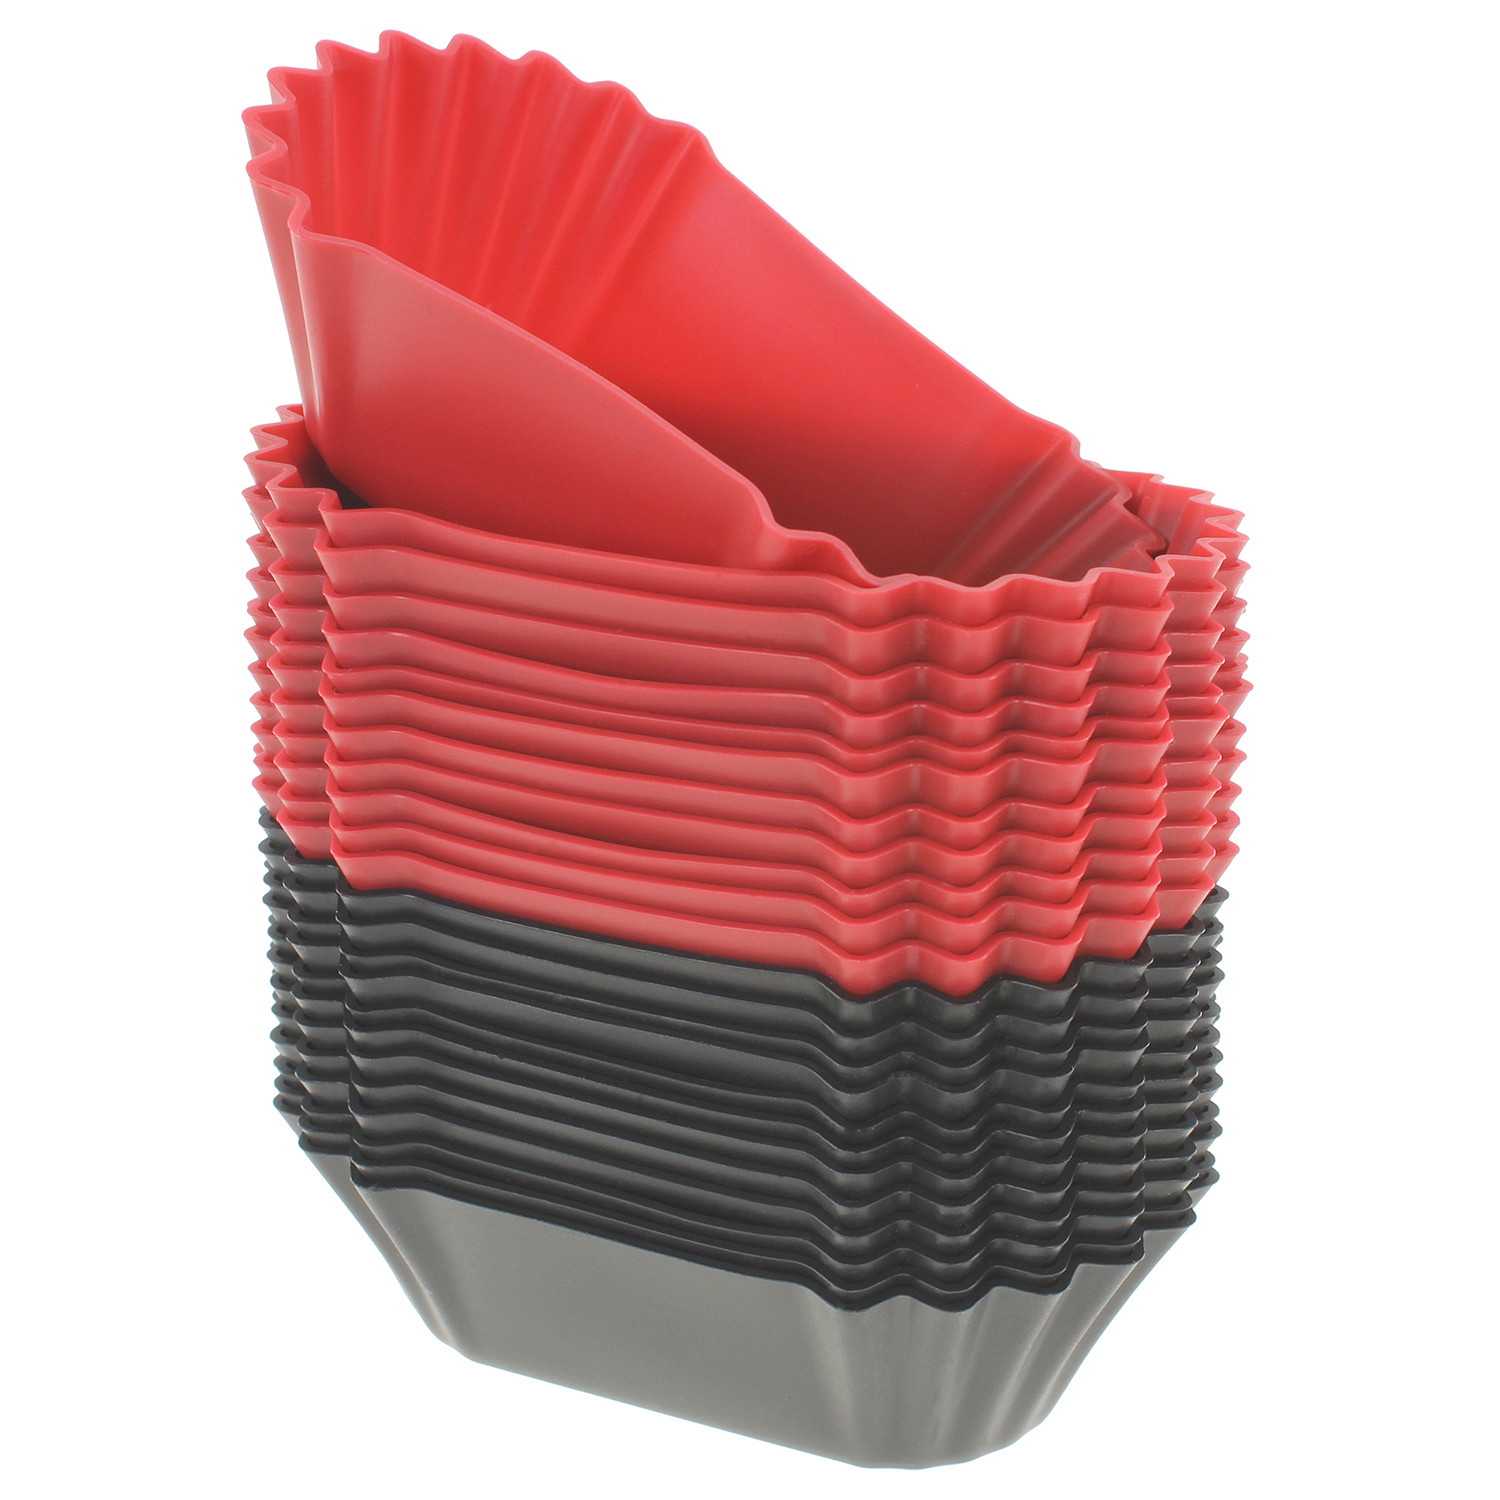 Freshware Silicone Cupcake Liners / Baking Cups - 24-Pack Jumbo Muffin Molds, 3-6/8 inch Rectangle, Red and Black Colors